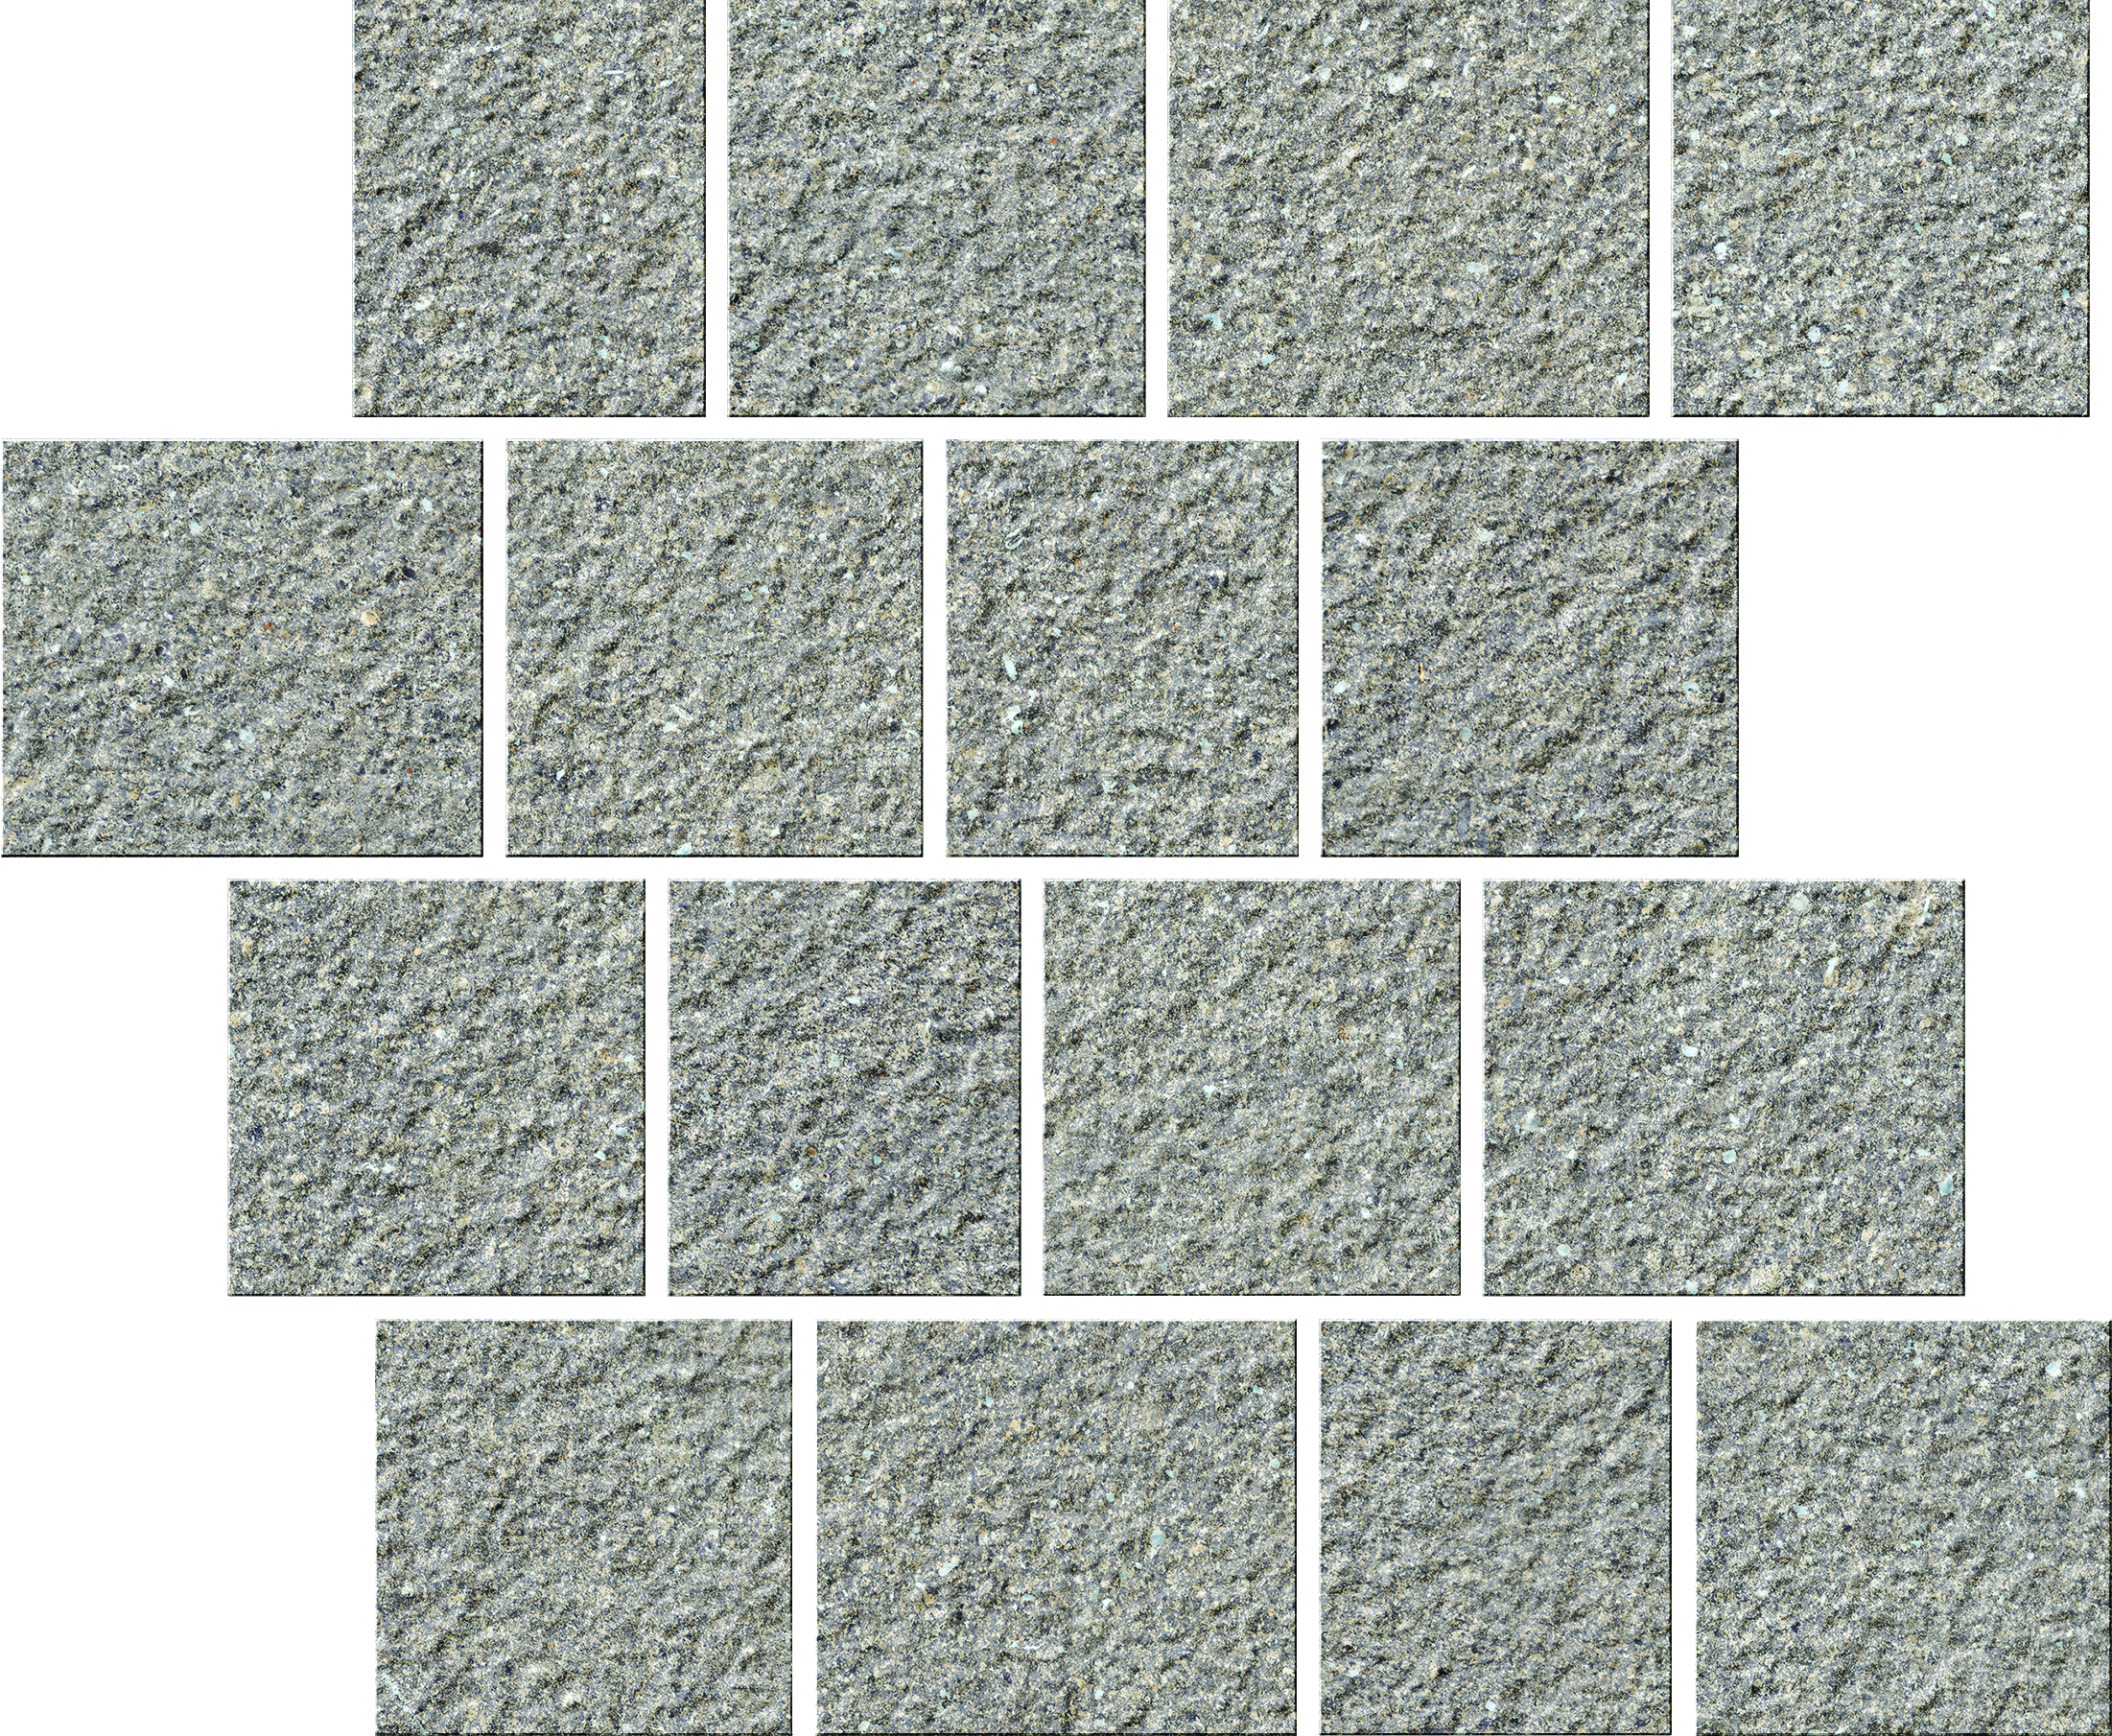 Serenissima Eclettica Piombo Rock Mosaic Pave 1081801 30x30cm rectified 9,5mm